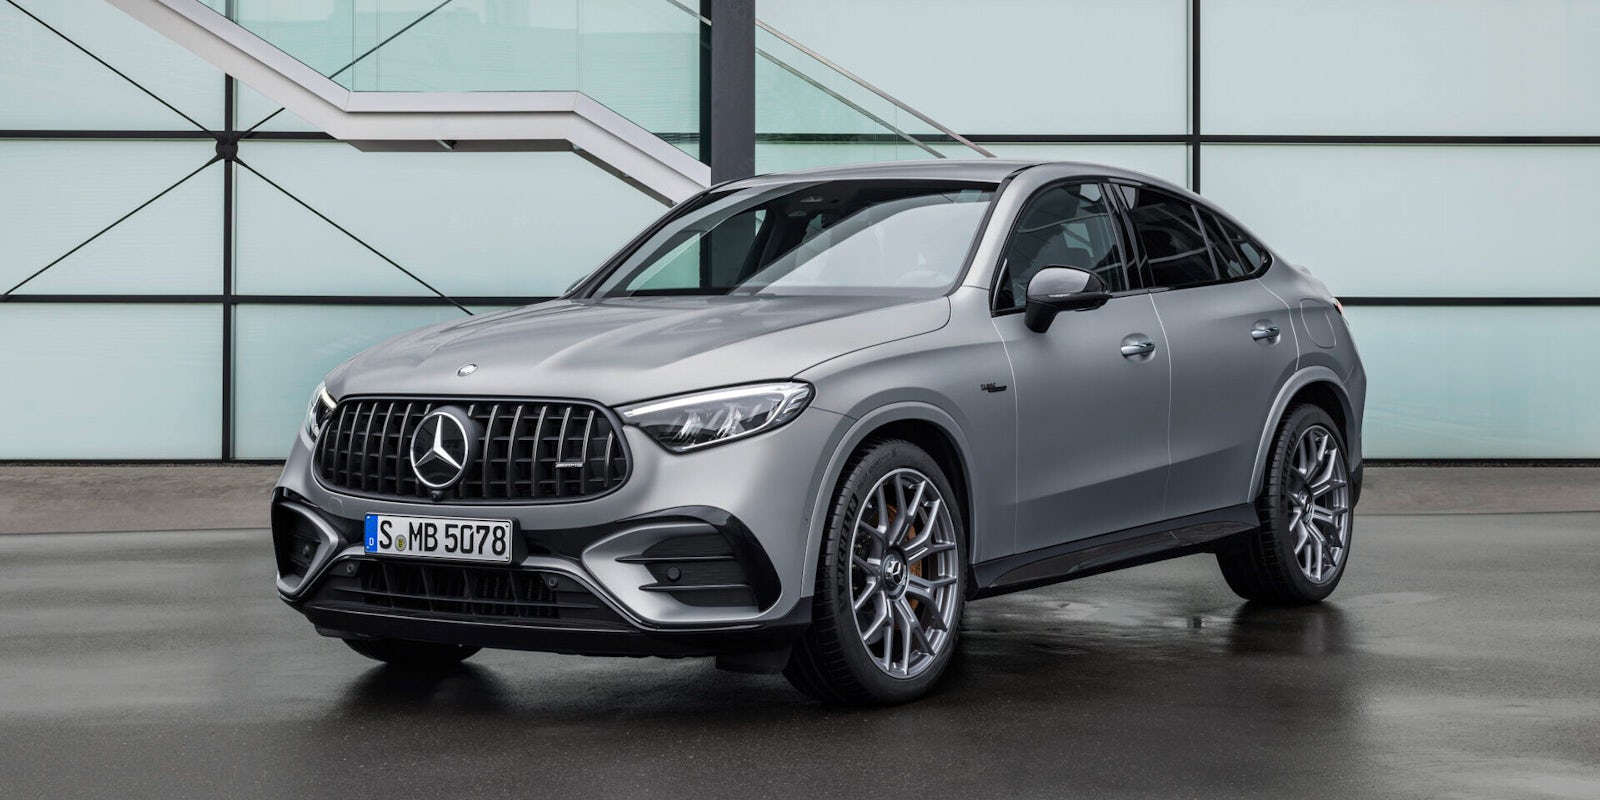 New Mercedes-AMG GLC Coupe revealed: everything we know so far